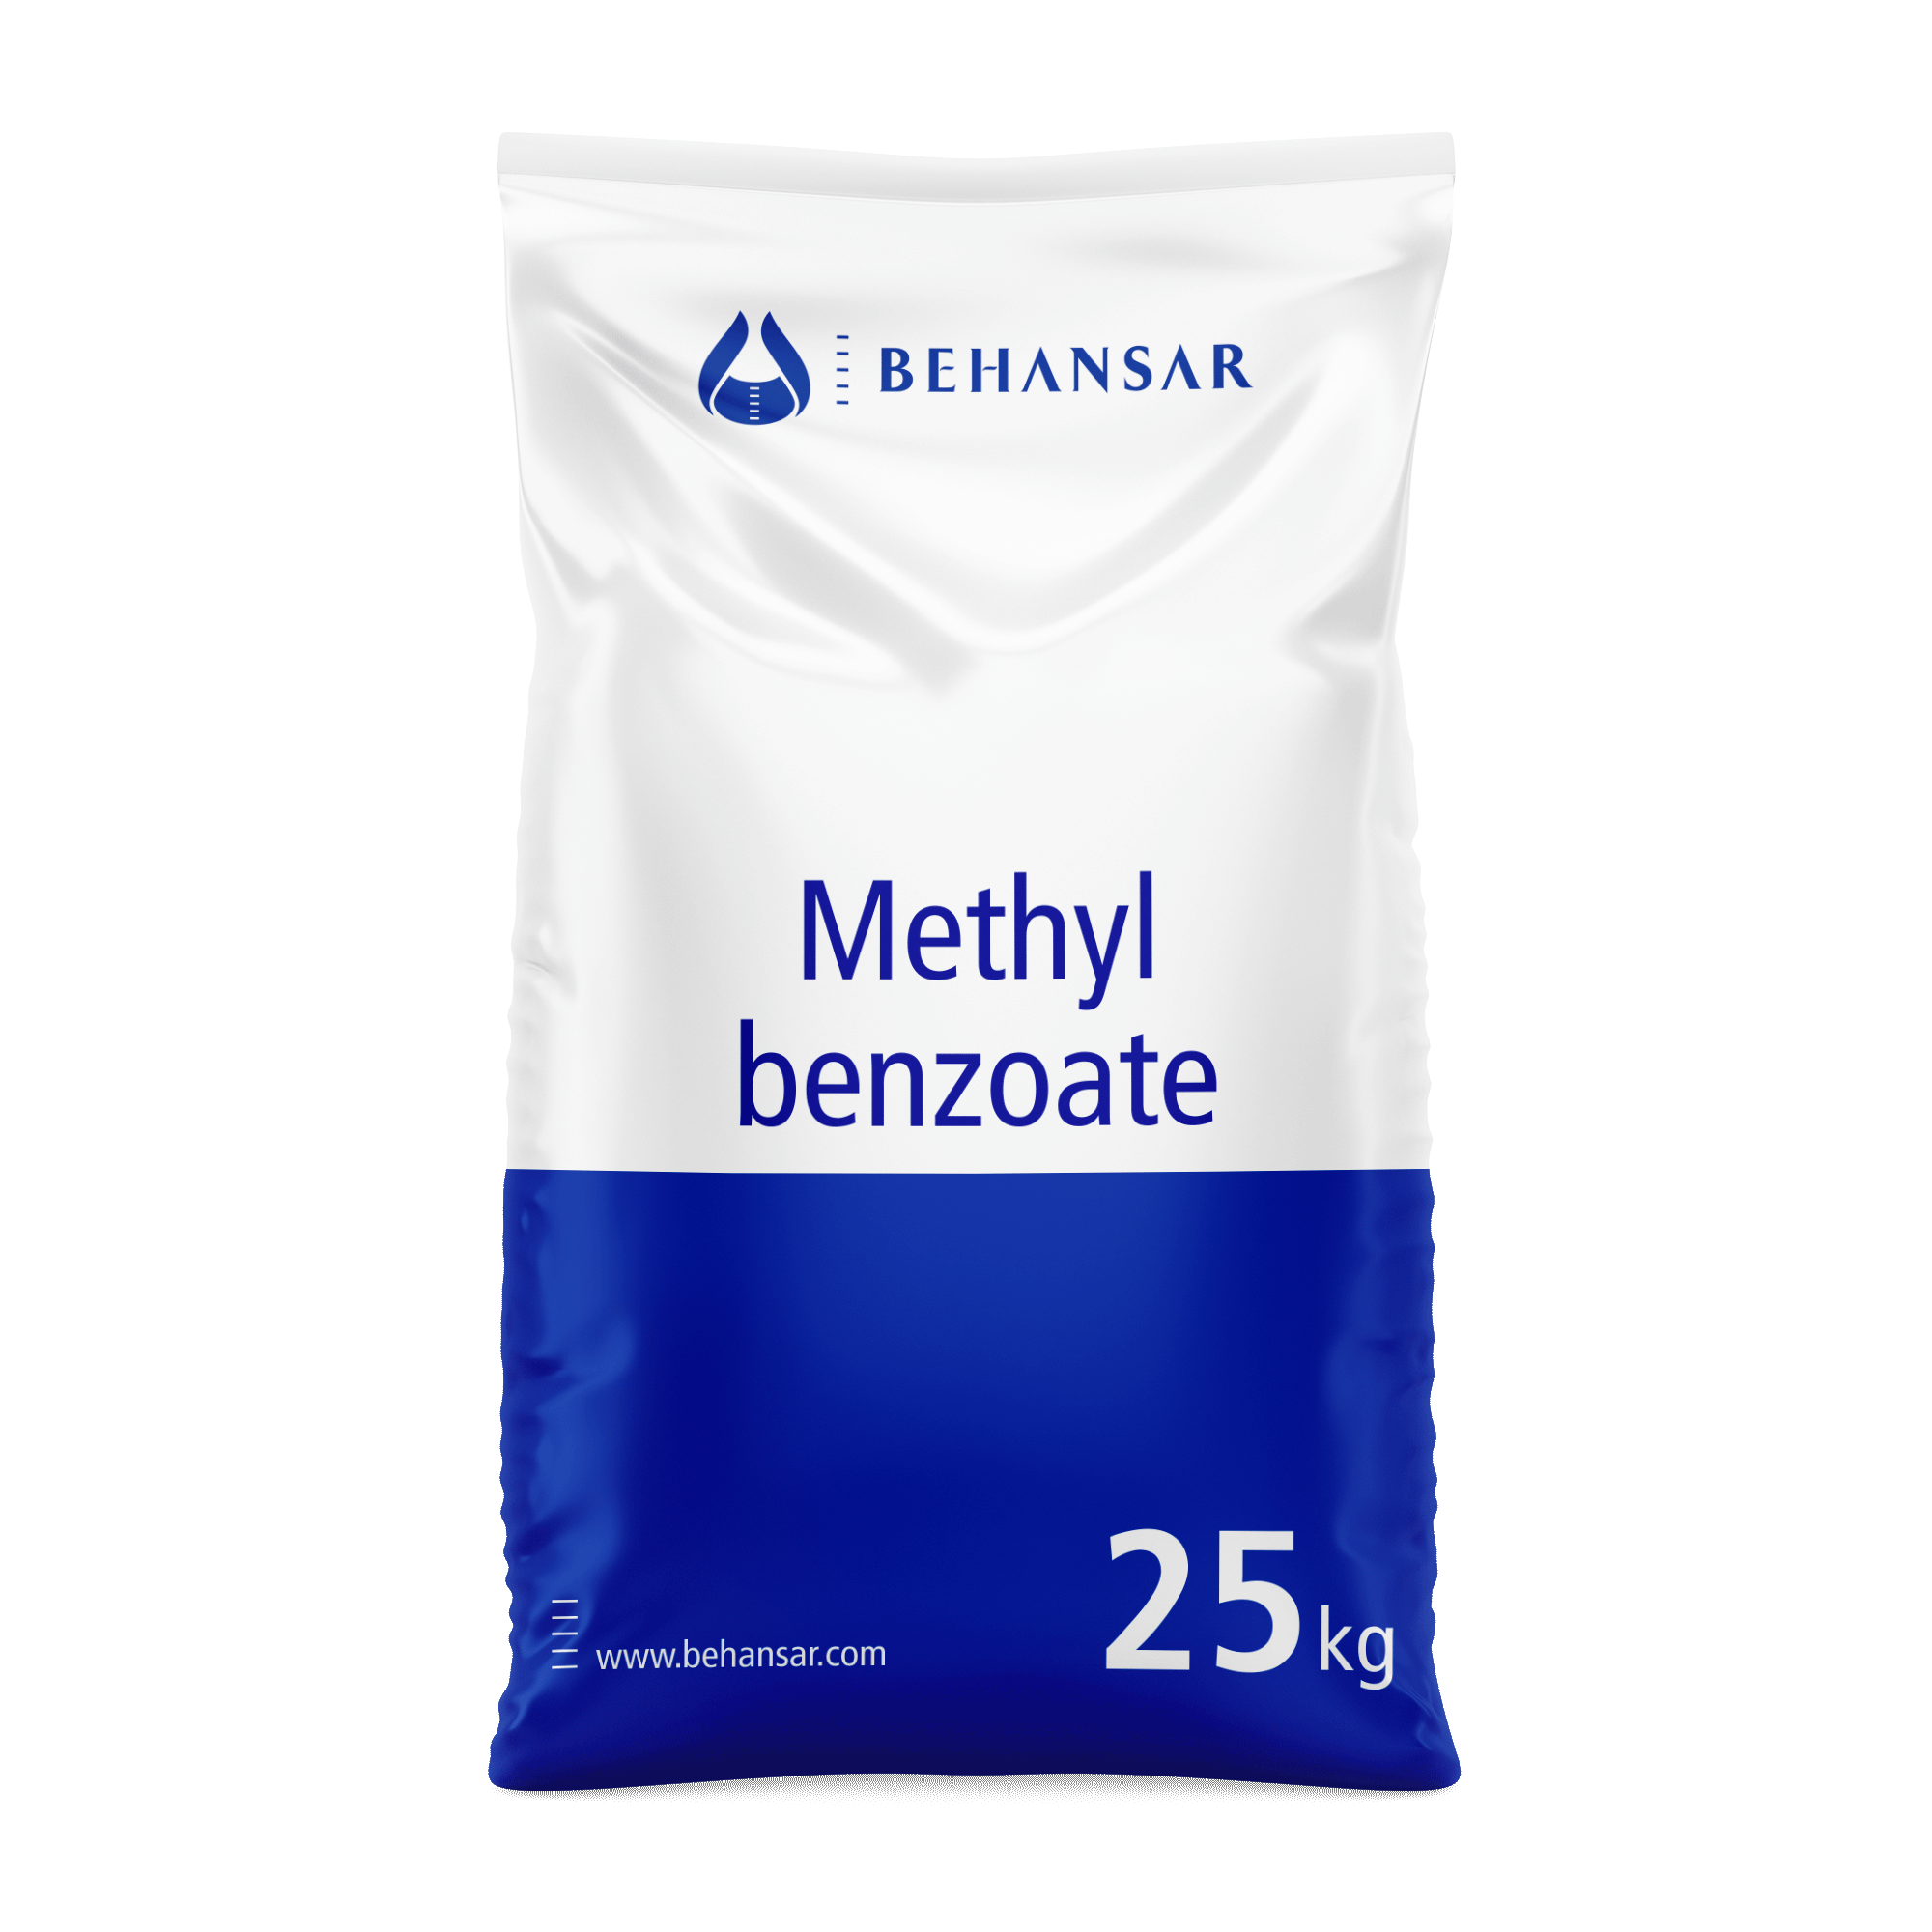 Methyl benzoate is one of the products of Behansar Co